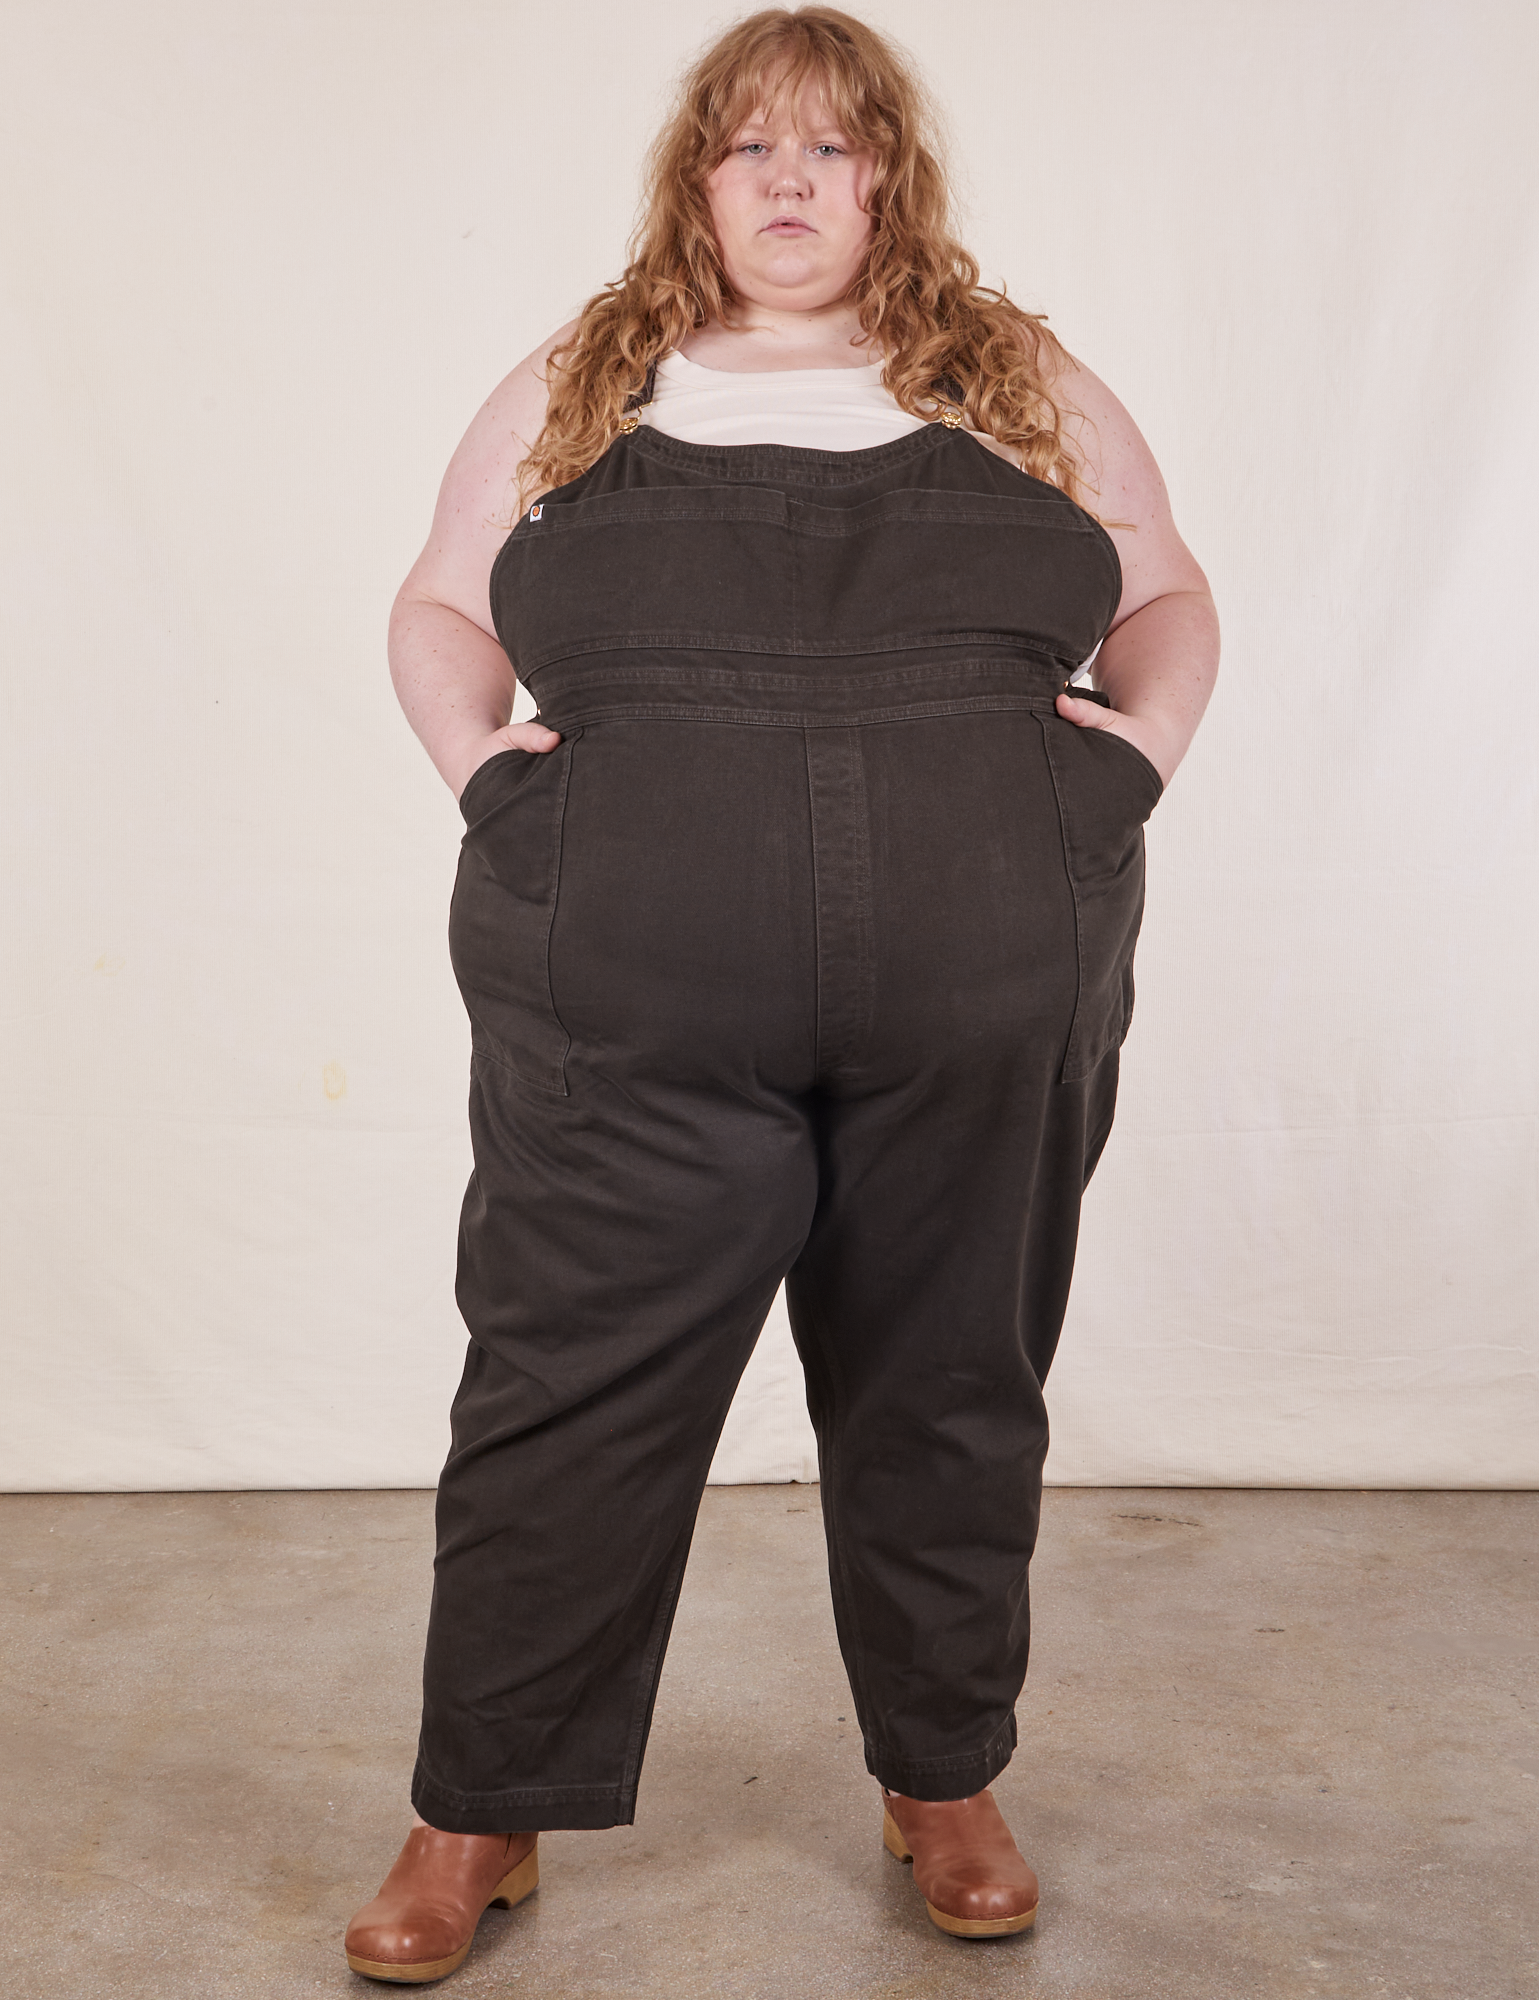 Catie is 5&#39;11&quot; and wearing size 5XL Original Overalls in Mono Espresso